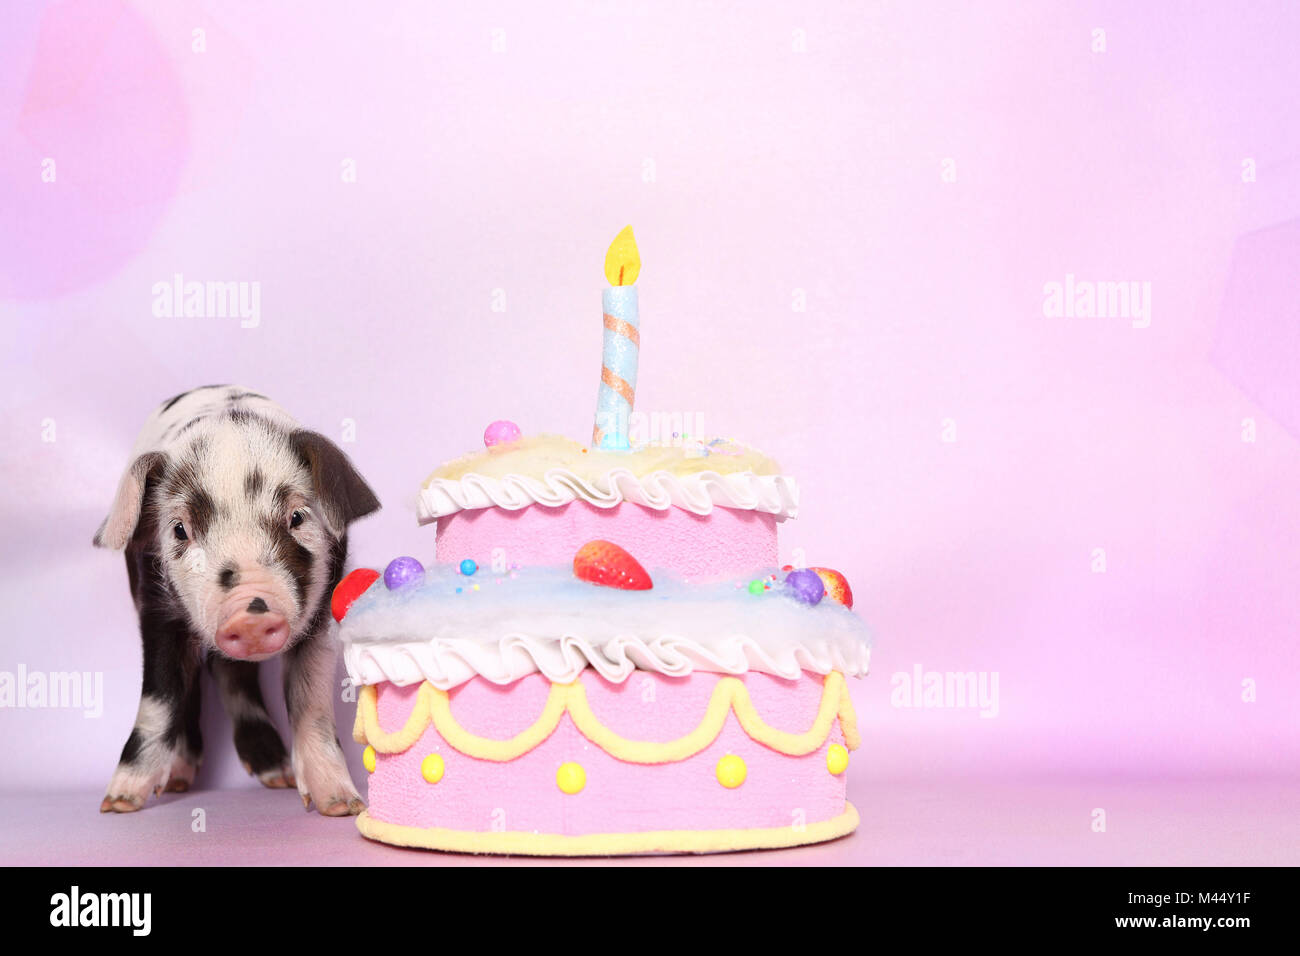 Domestic Pig, Turopolje x ?. Piglet (4 weeks old) standing next to a big birthday cake. Studio picture seen against a pink background. Germany Stock Photo